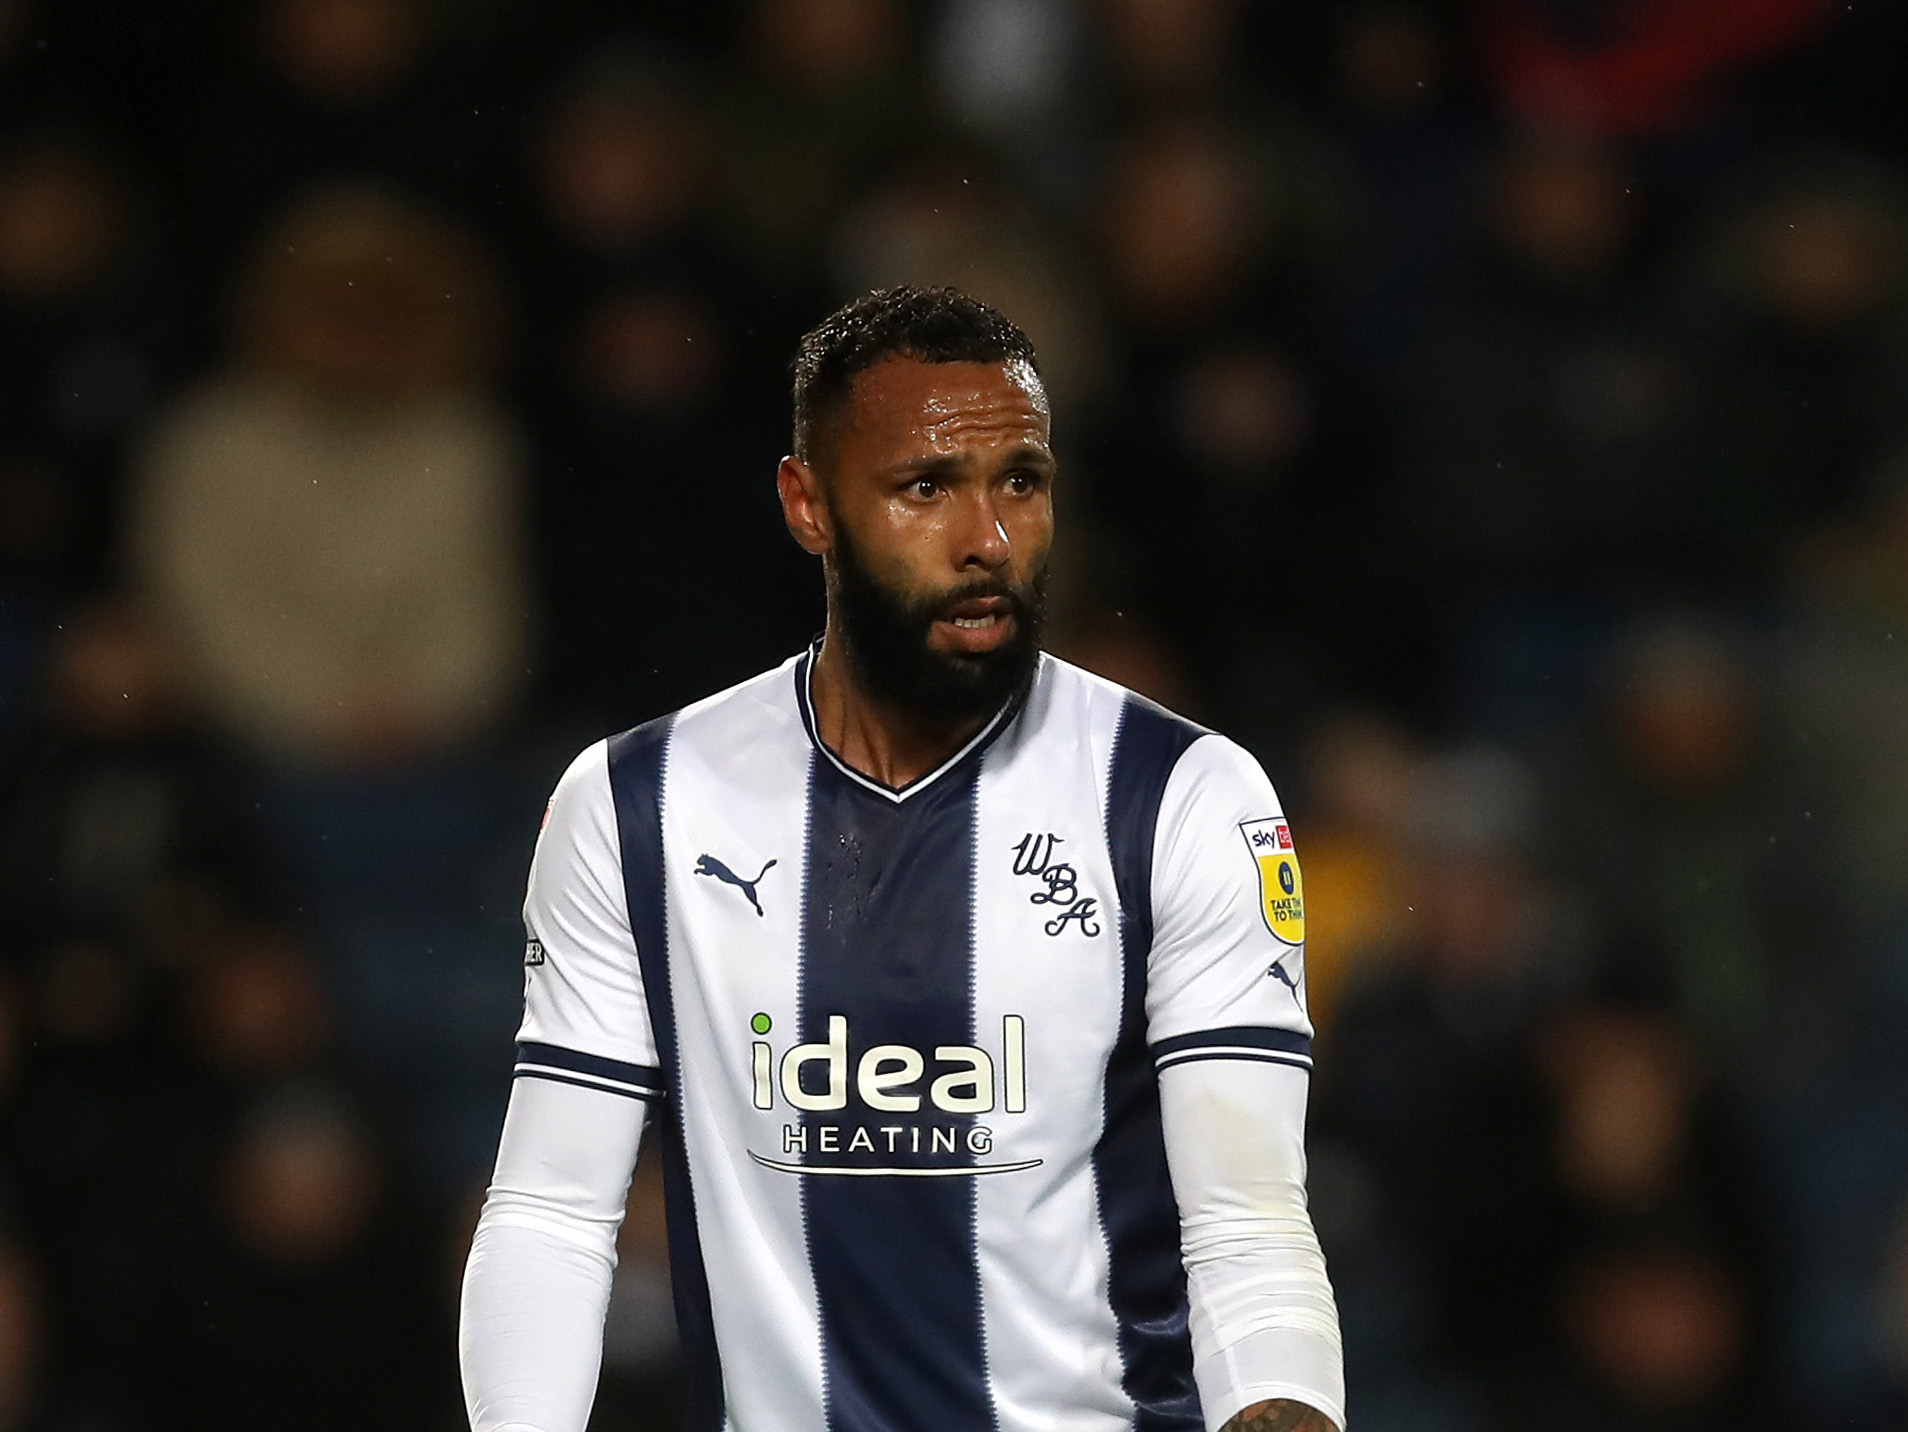 Kyle Bartley in the 2022/23 home kit